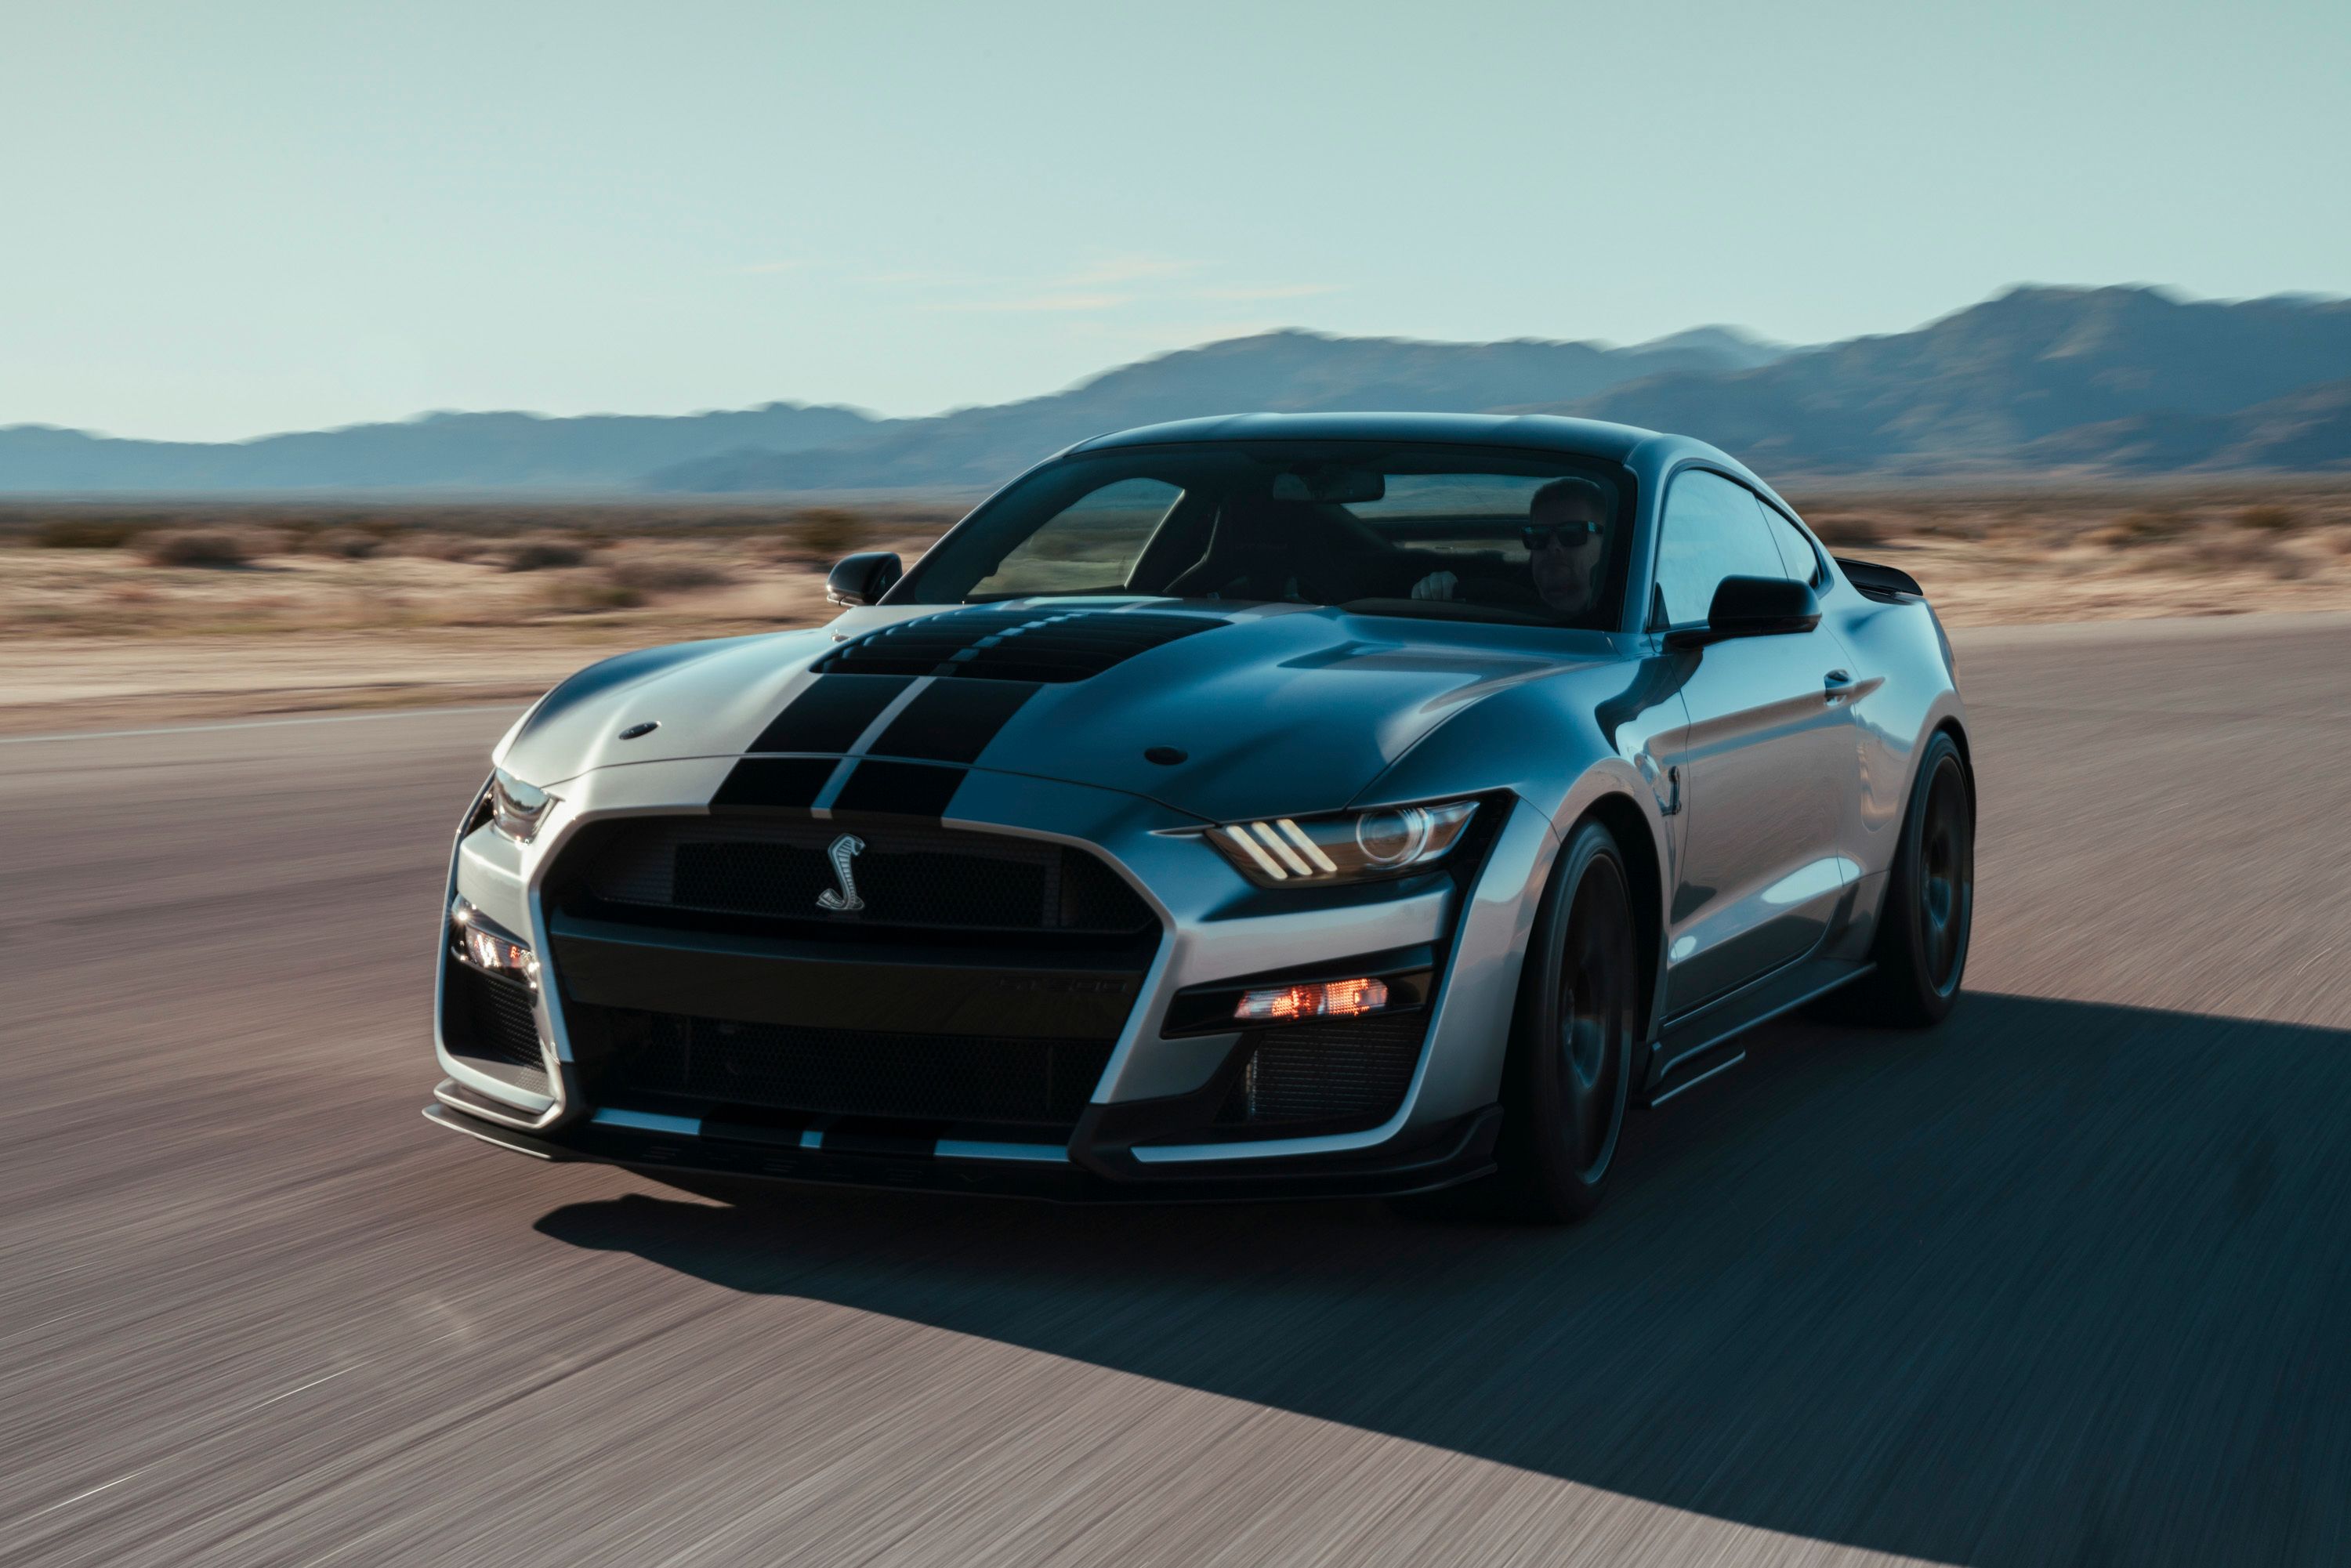 1962 Here's How the 2020 Ford Mustang Shelby GT500 Can Go from 0-100 mph and back to 0 in 10.6 Seconds